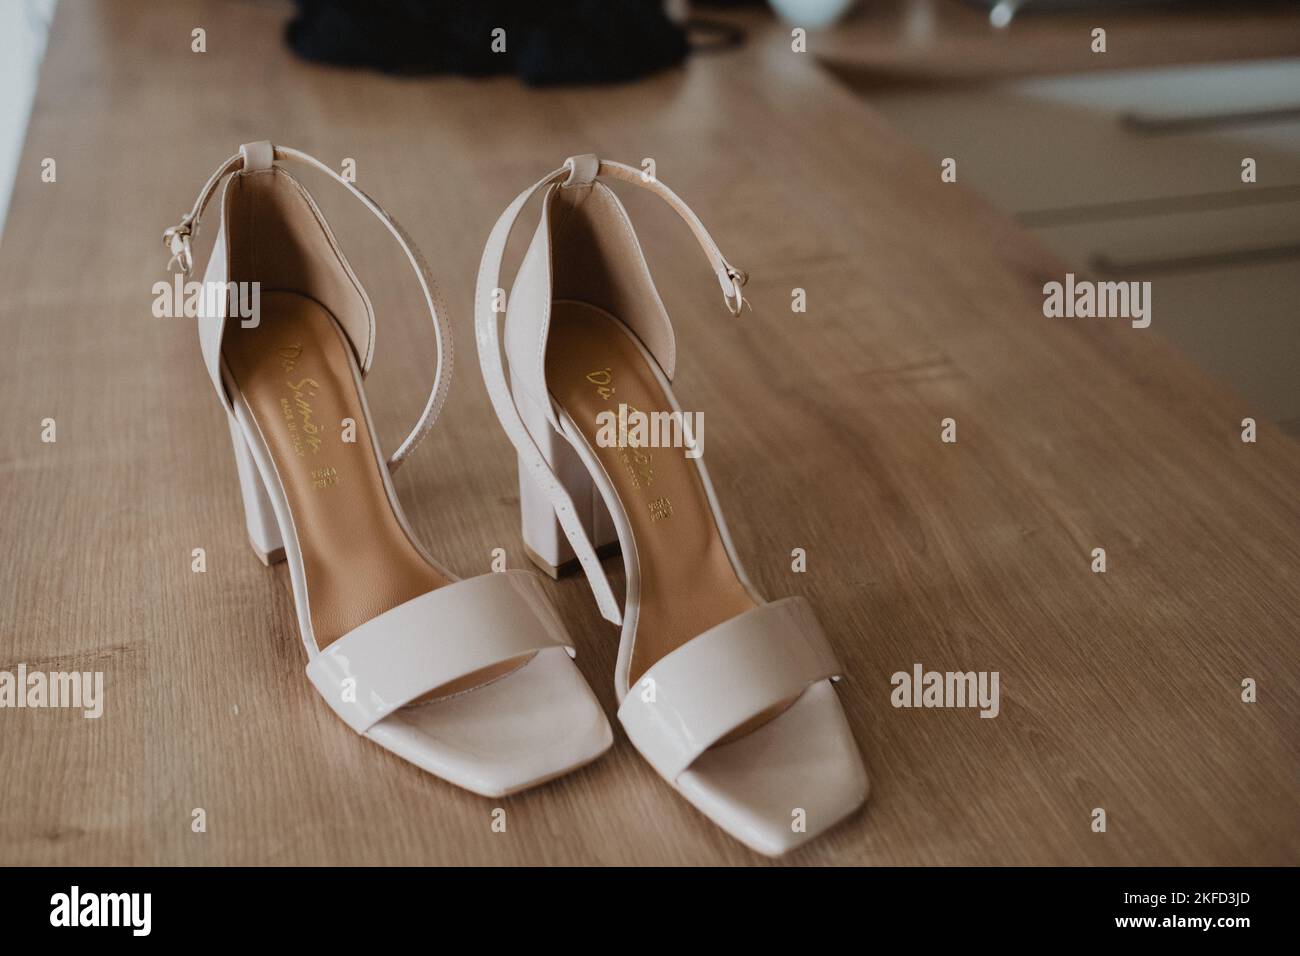 A pair of creamy bridal shoes on the tabel Stock Photo